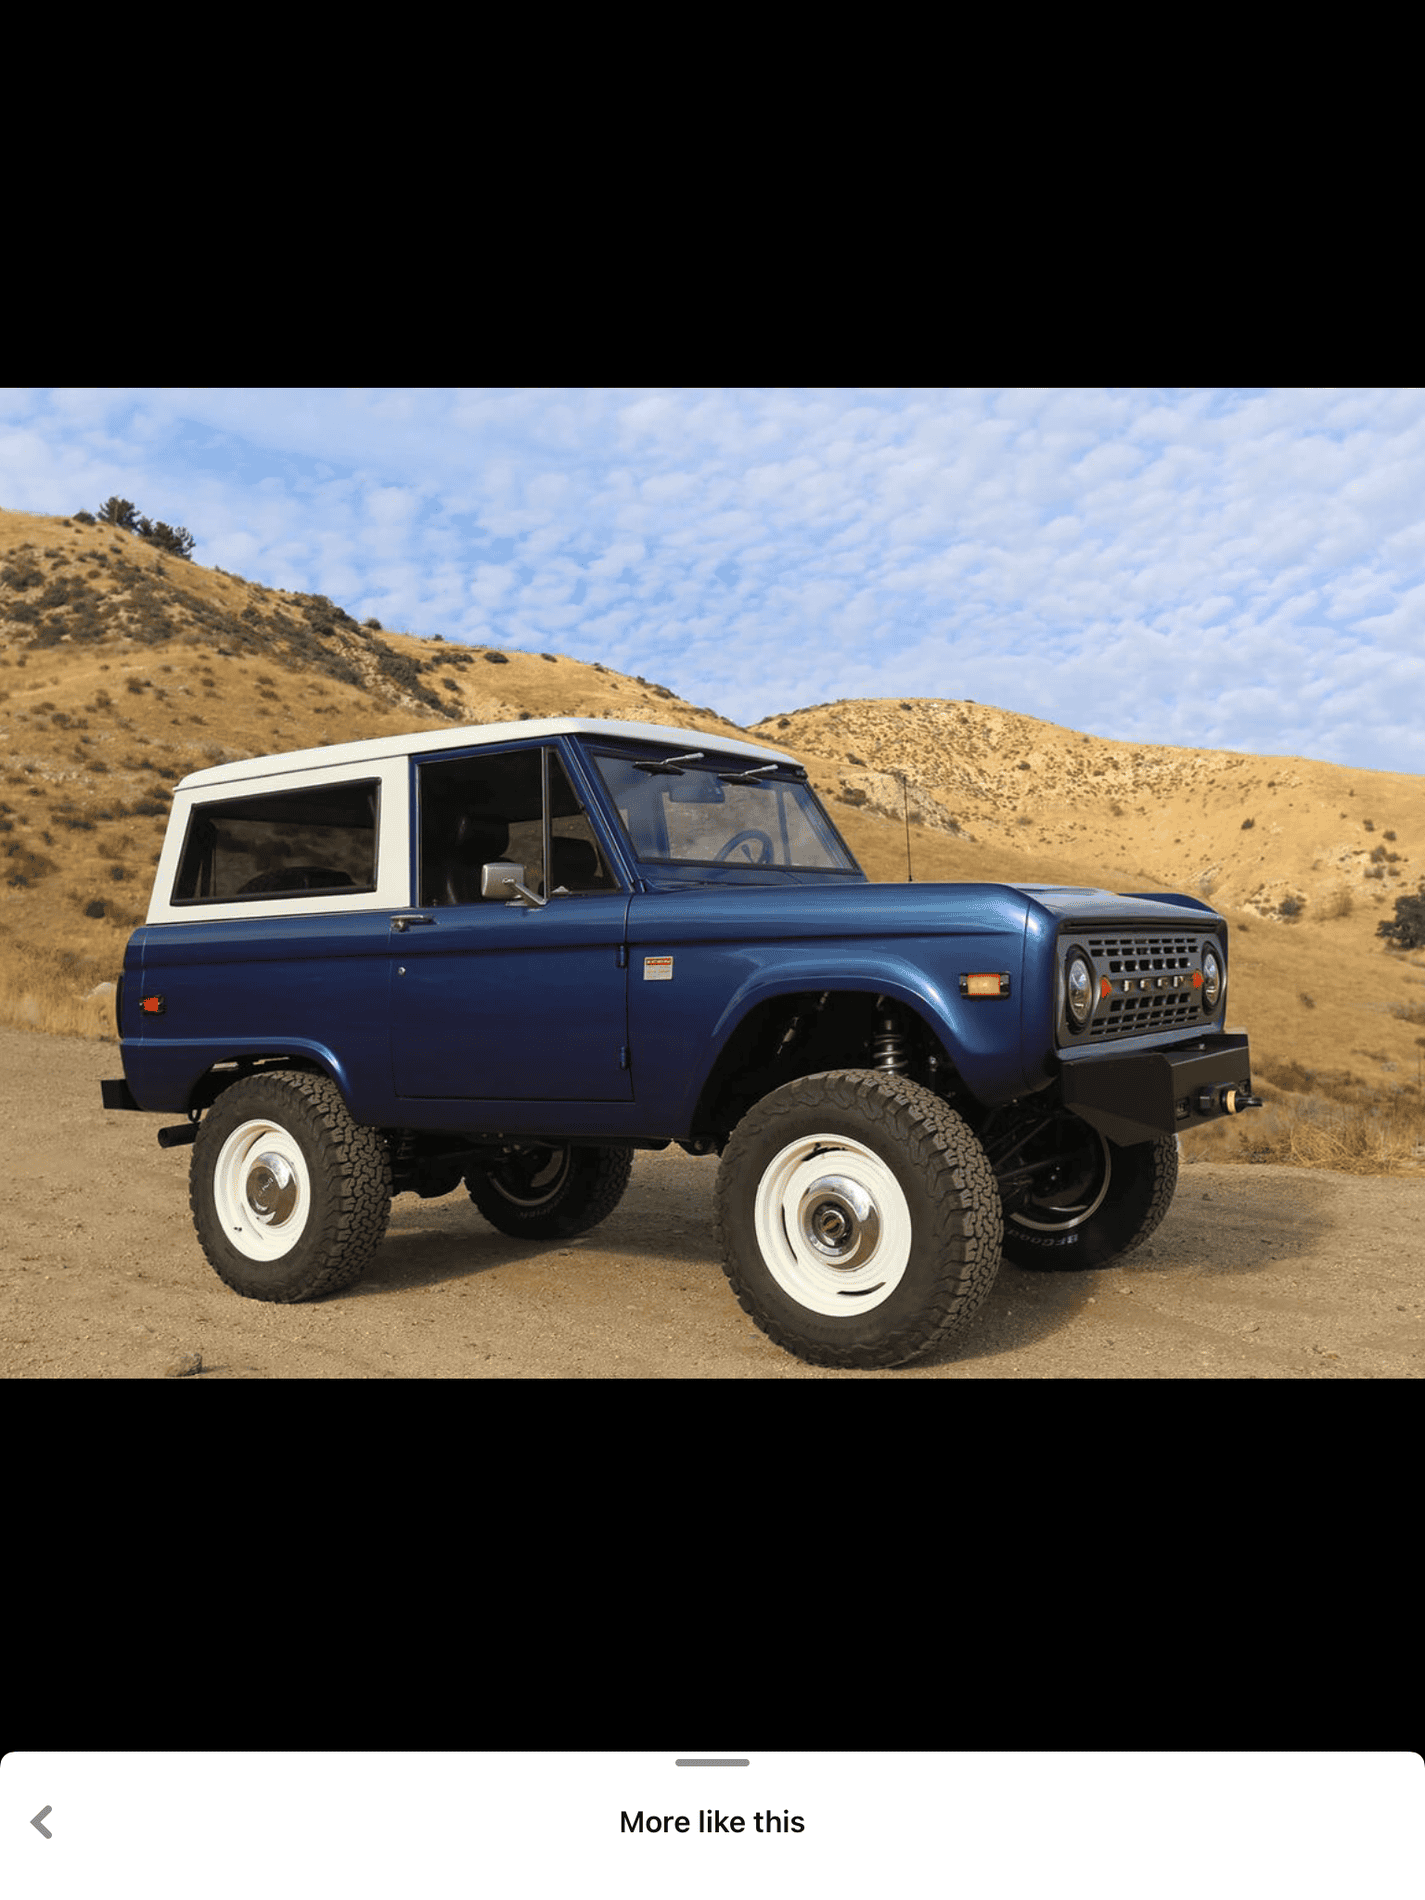 Ford Bronco Color Decision for my Base 2 DR? 4D75C988-B51A-49FB-88AB-58C62AE5583C